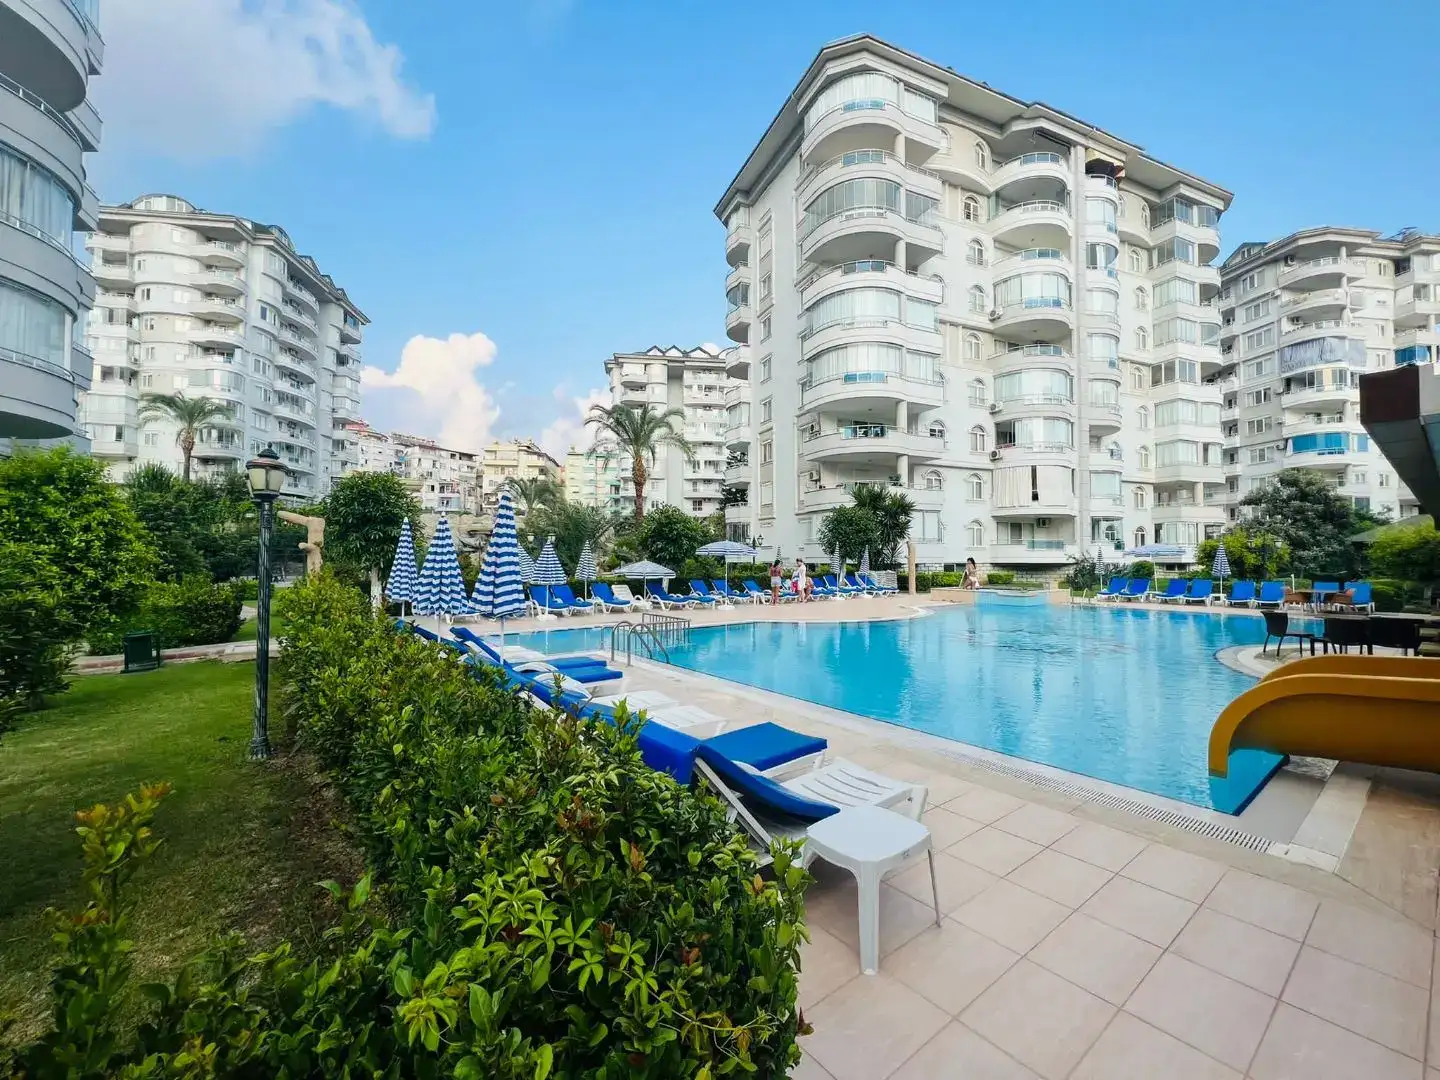 FULL ACTİVİTY APARTMENT FOR SALE İN CİKCİLLİ-ALANYA